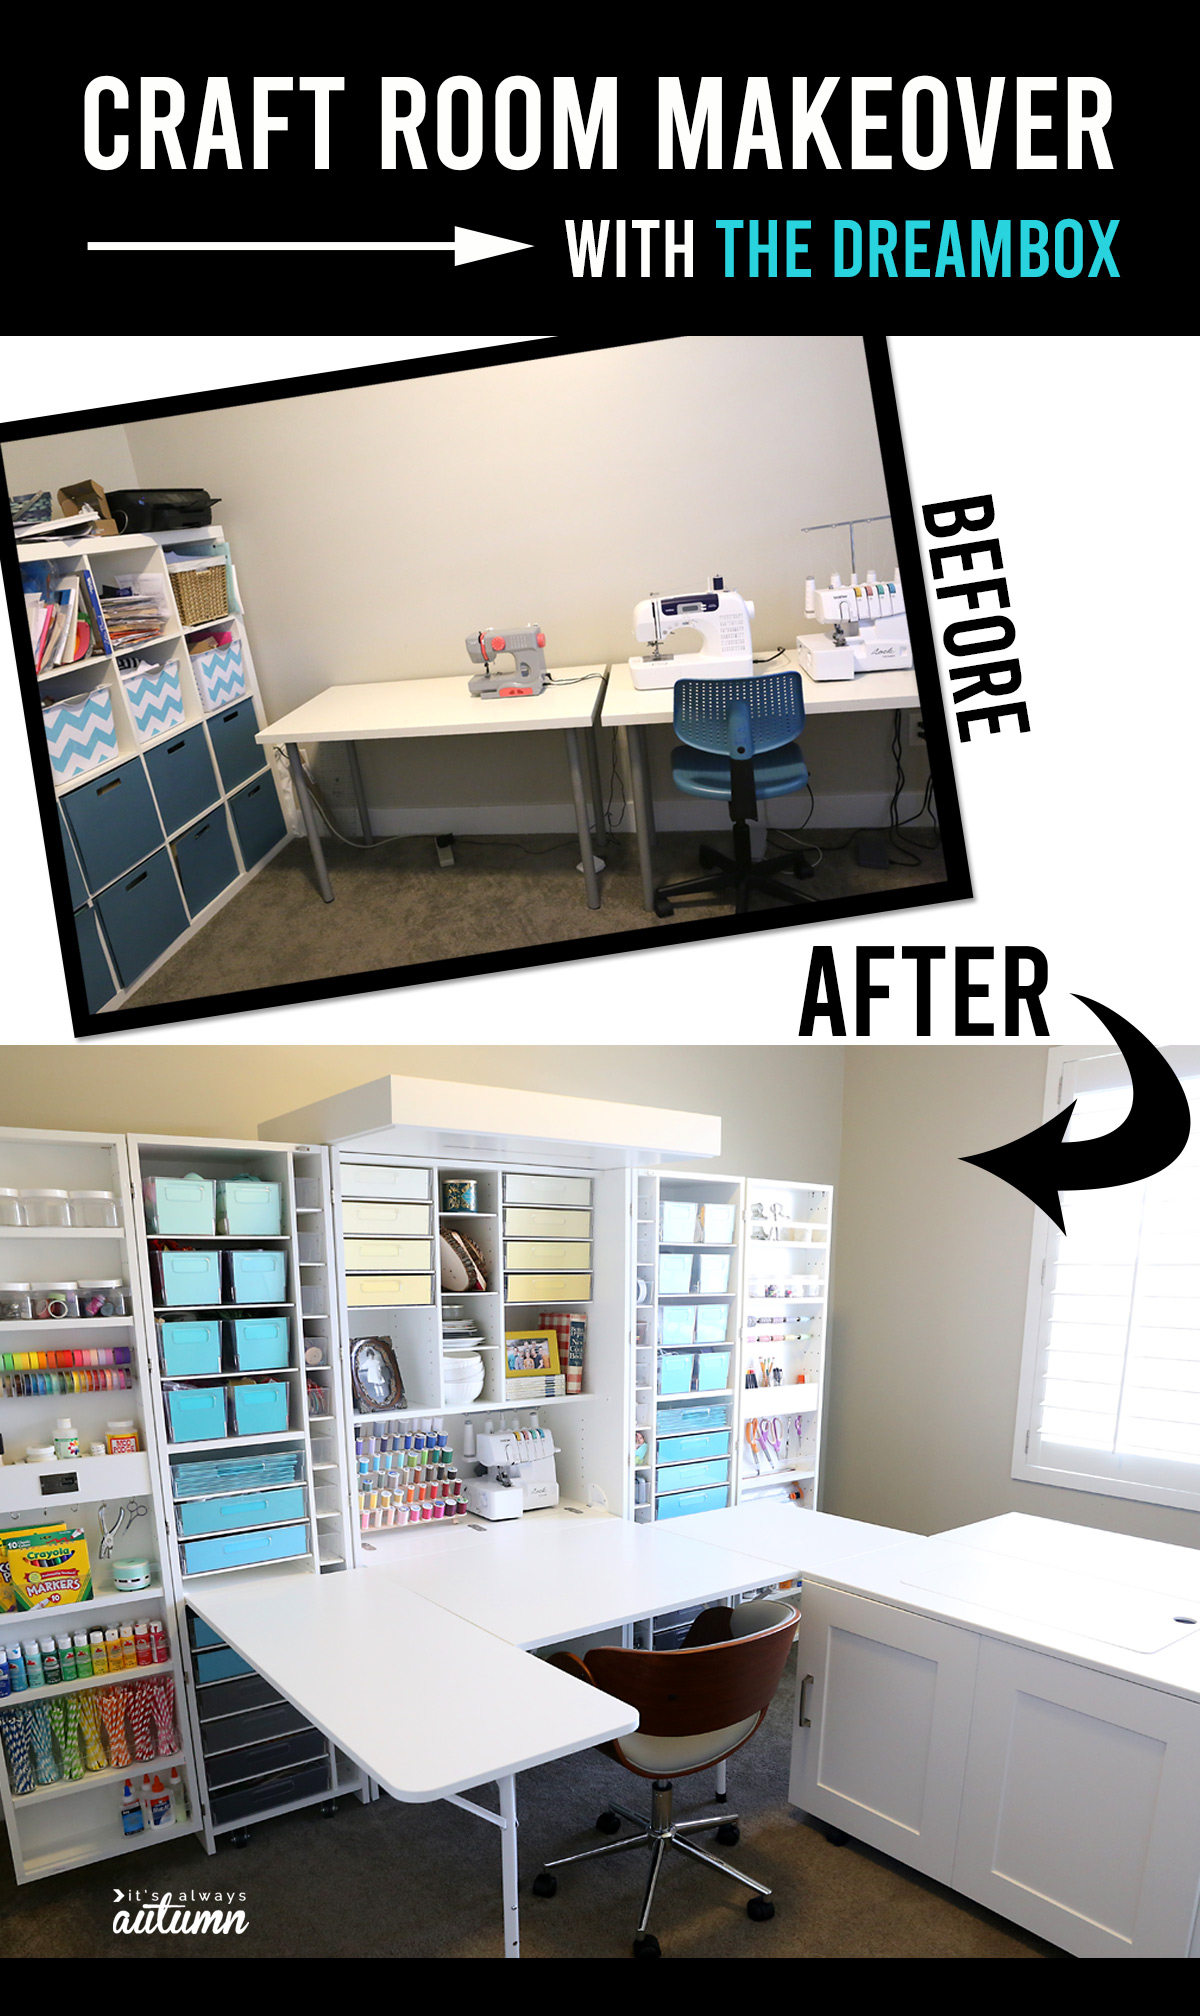 The DreamBox craft organization system can completely transform your craft room! Learn what I love about it, and what I don't.